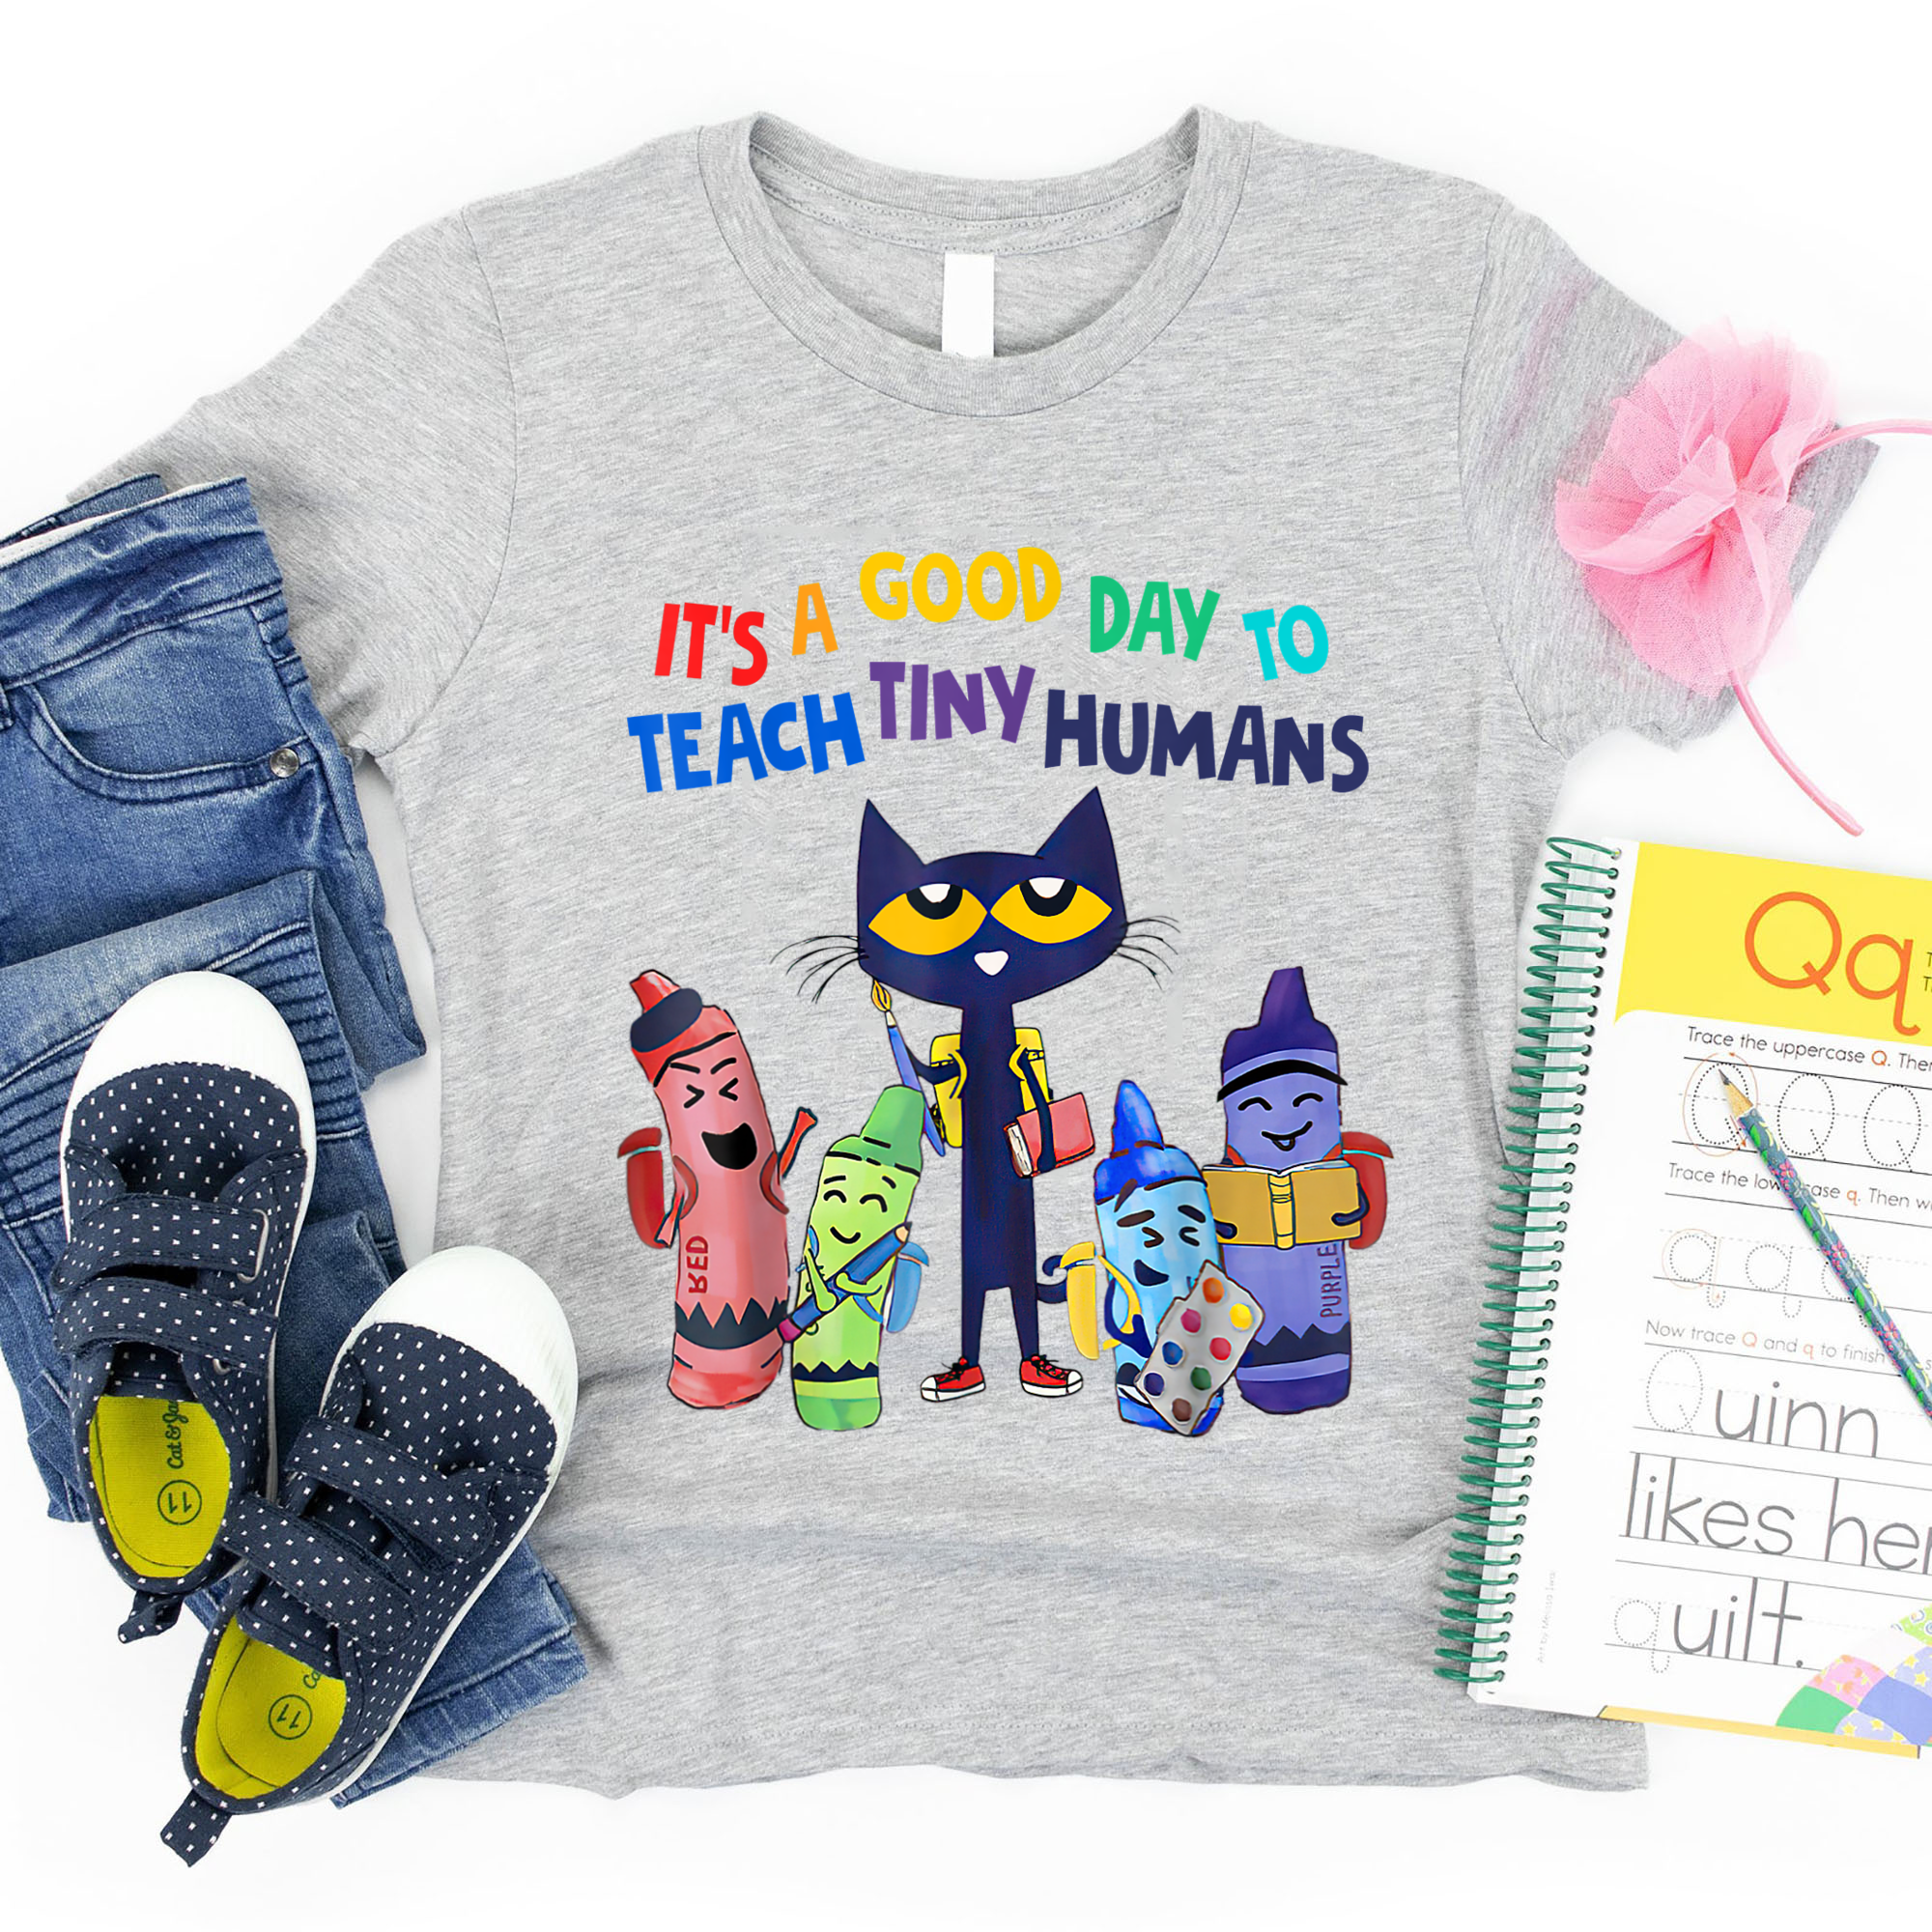 It'a Good Day To Teach Tiny Humans Funny Pete The Cat Teacher T-Shirt, Pete the Cat Shirt